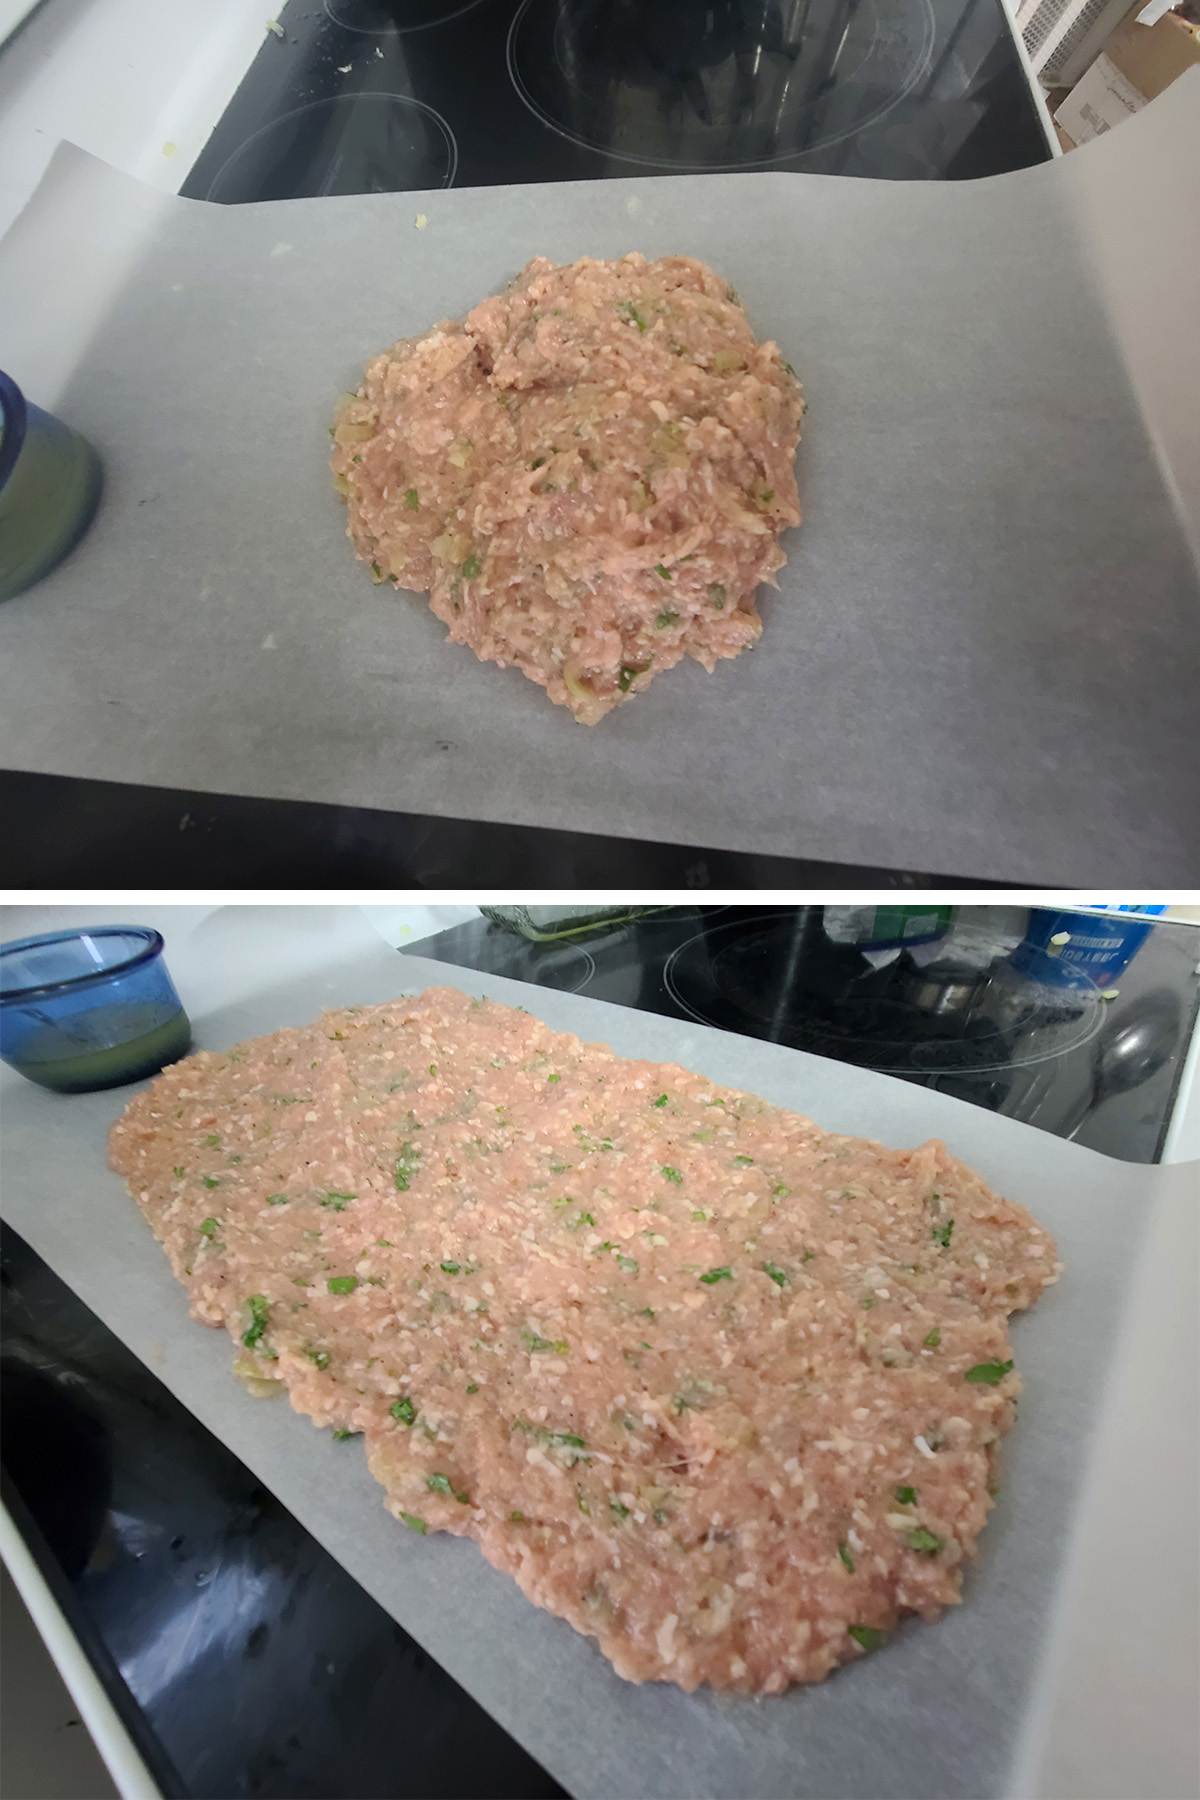 The mound of seasoned ground chicken being spread into a ½" thick rectangle.